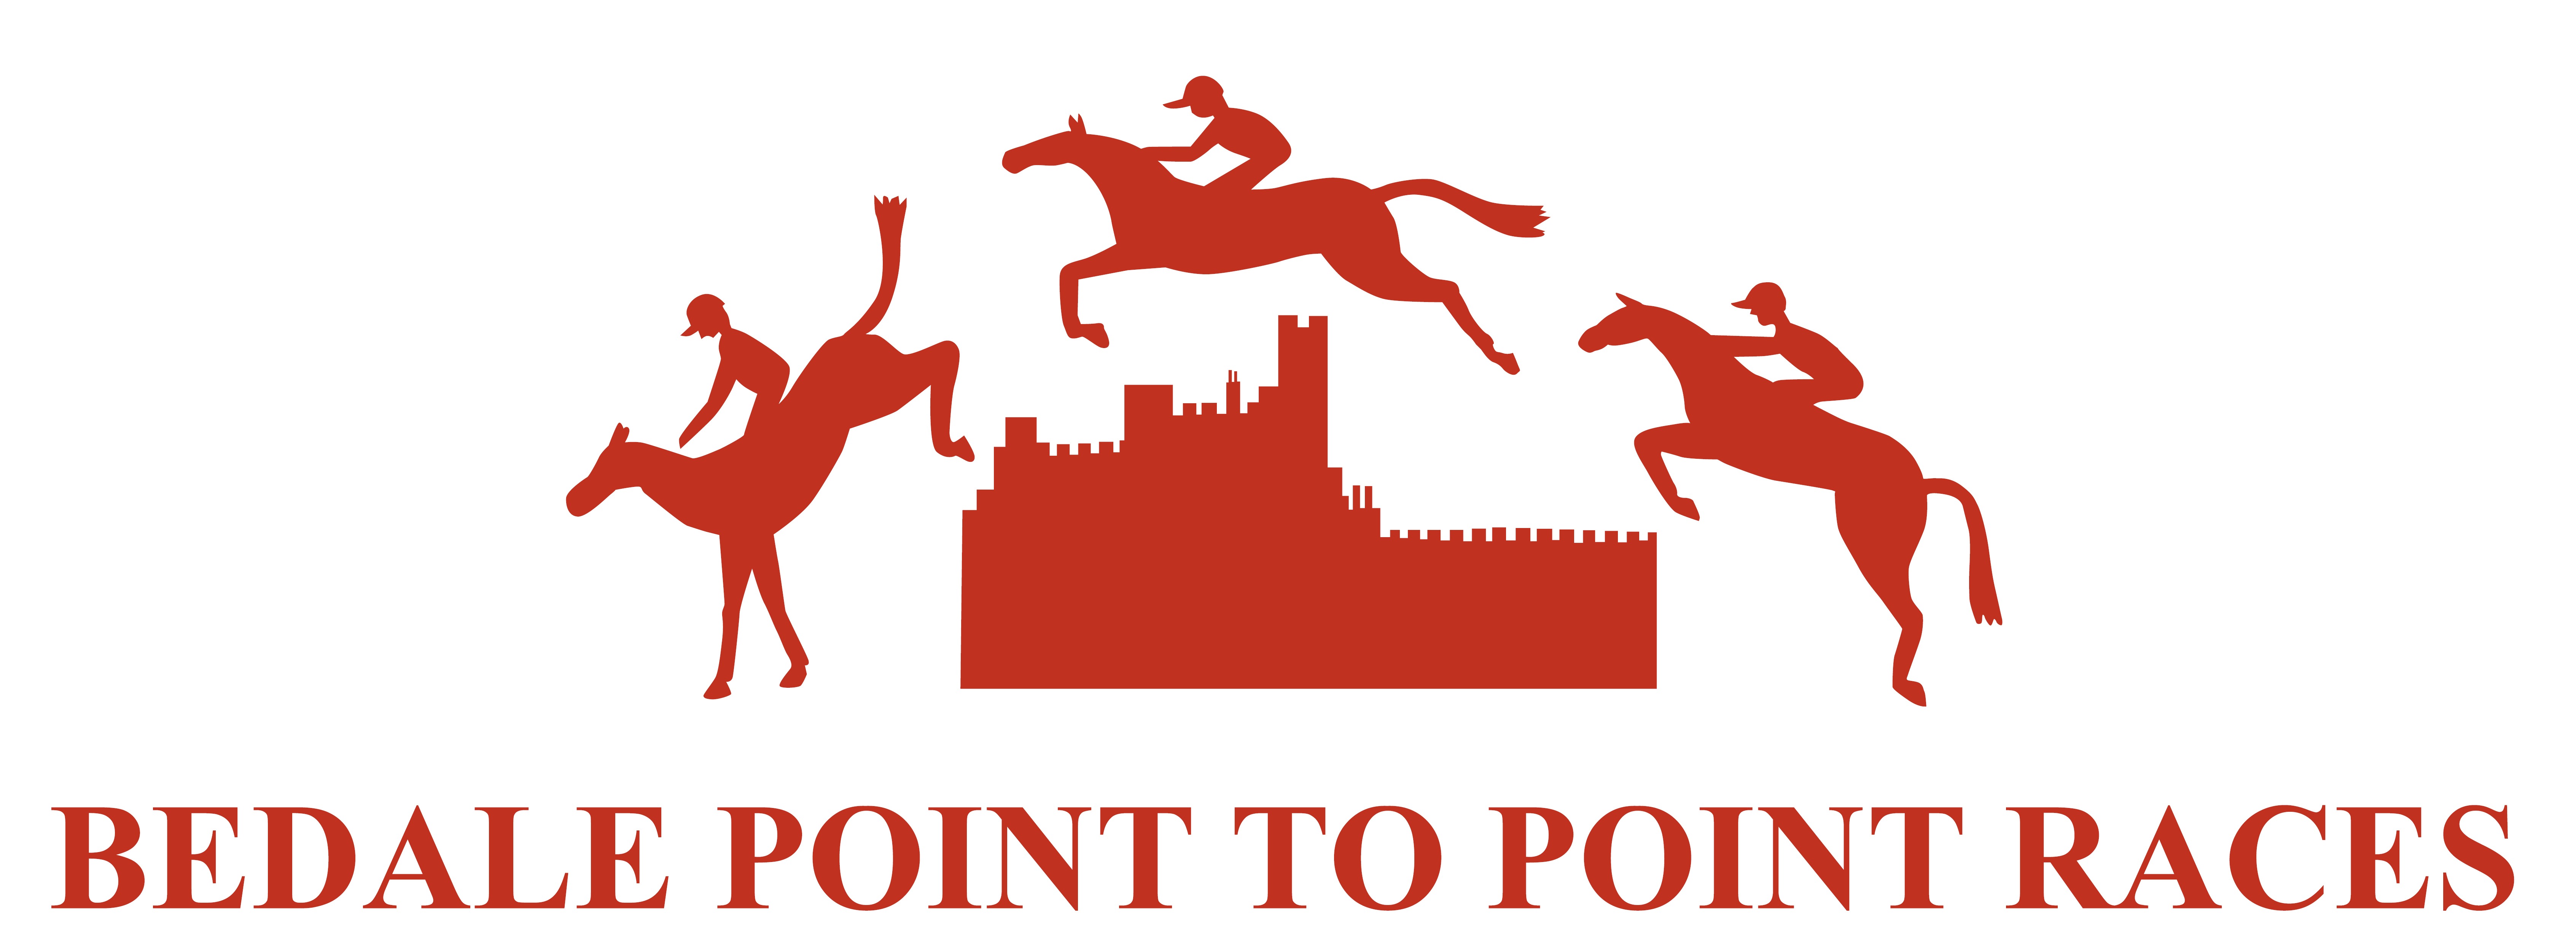 Bedale Point to Point Races